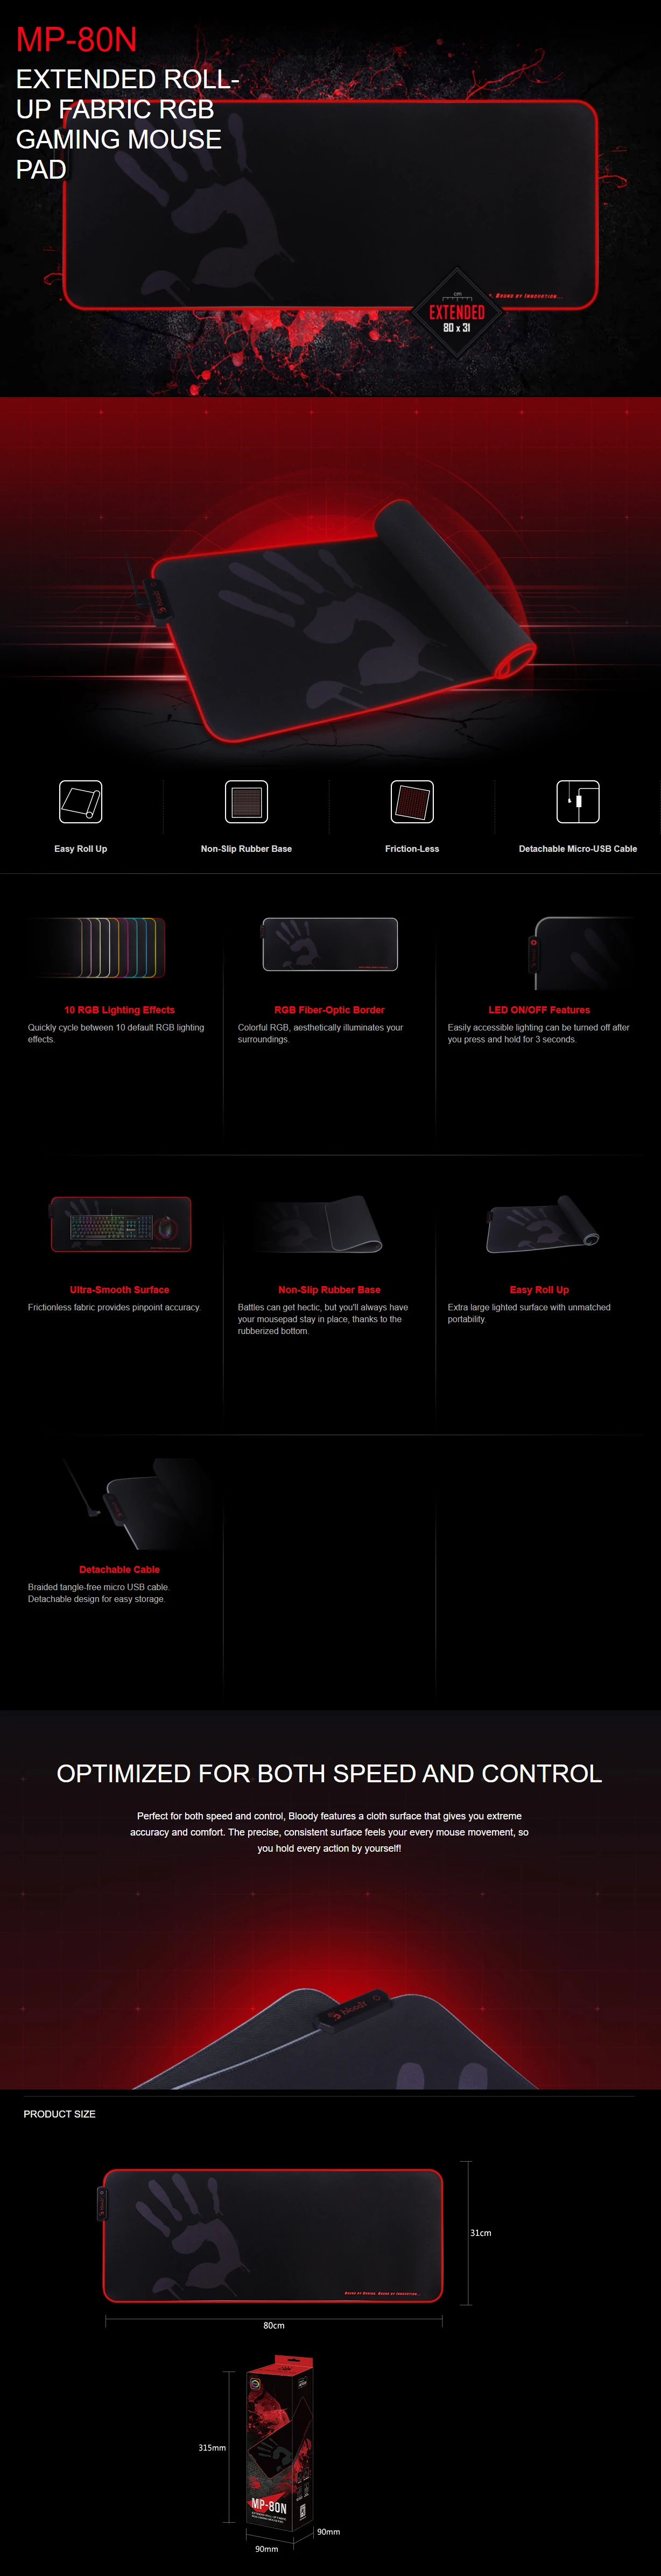 Overview - Bloody - MP-80N Extended Roll-Up Fabric RGB Gaming Mouse Pad